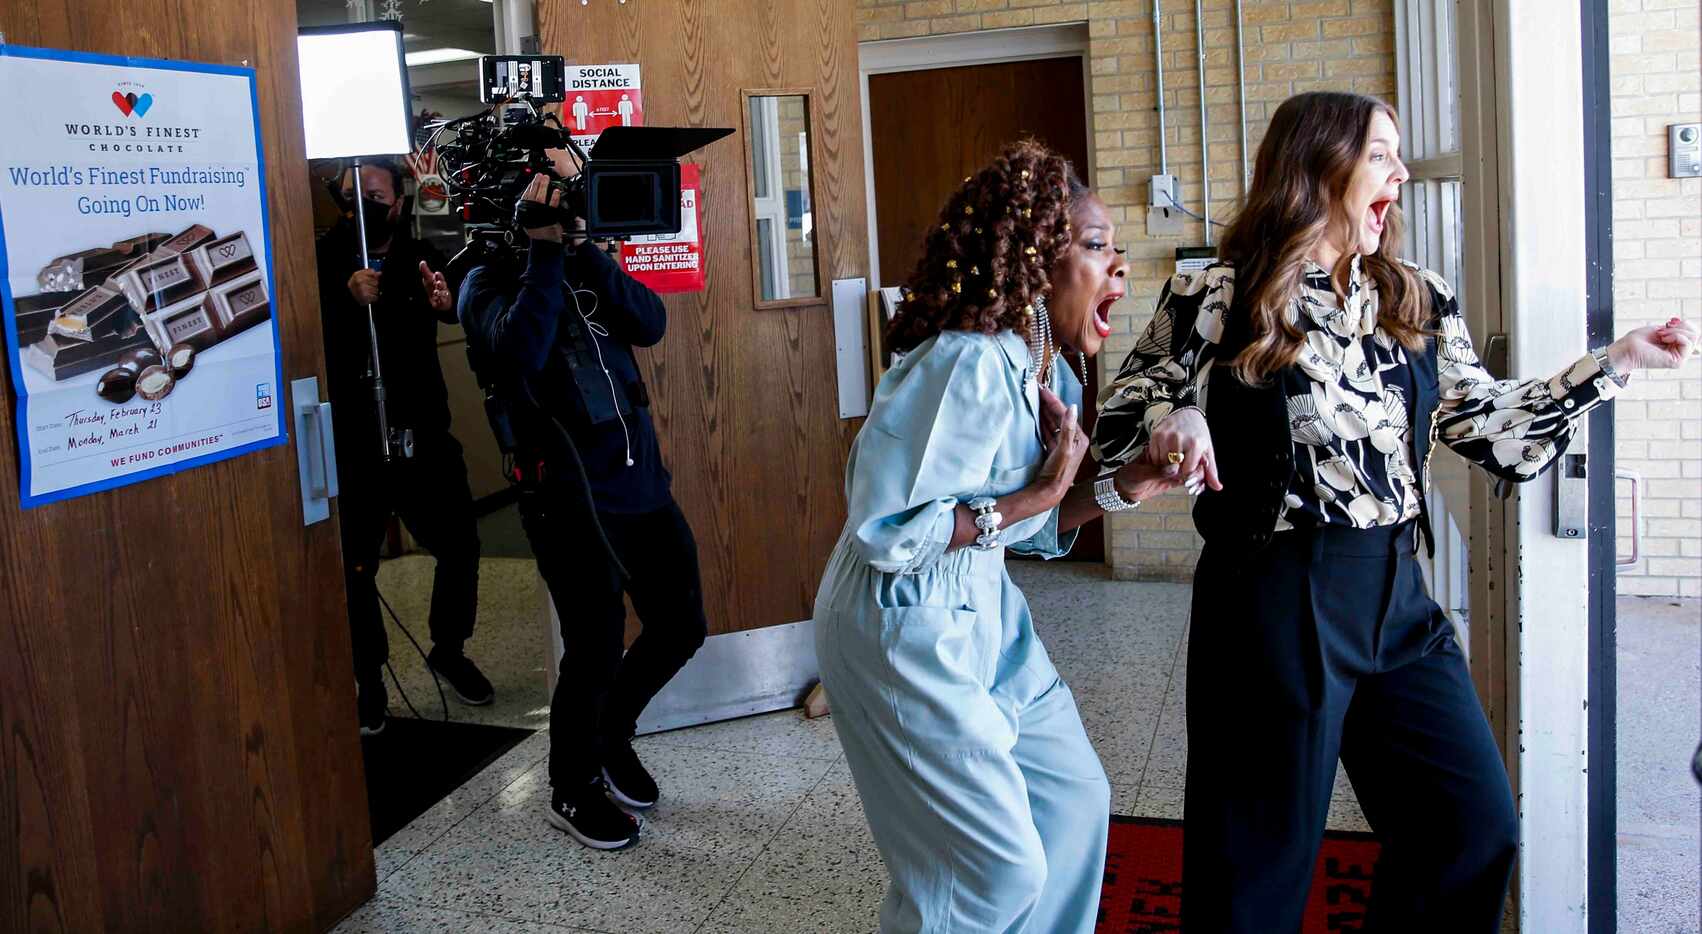 Patricia Byrd, left, and Drew Barrymore reacts as they open the entrance door to meet the...